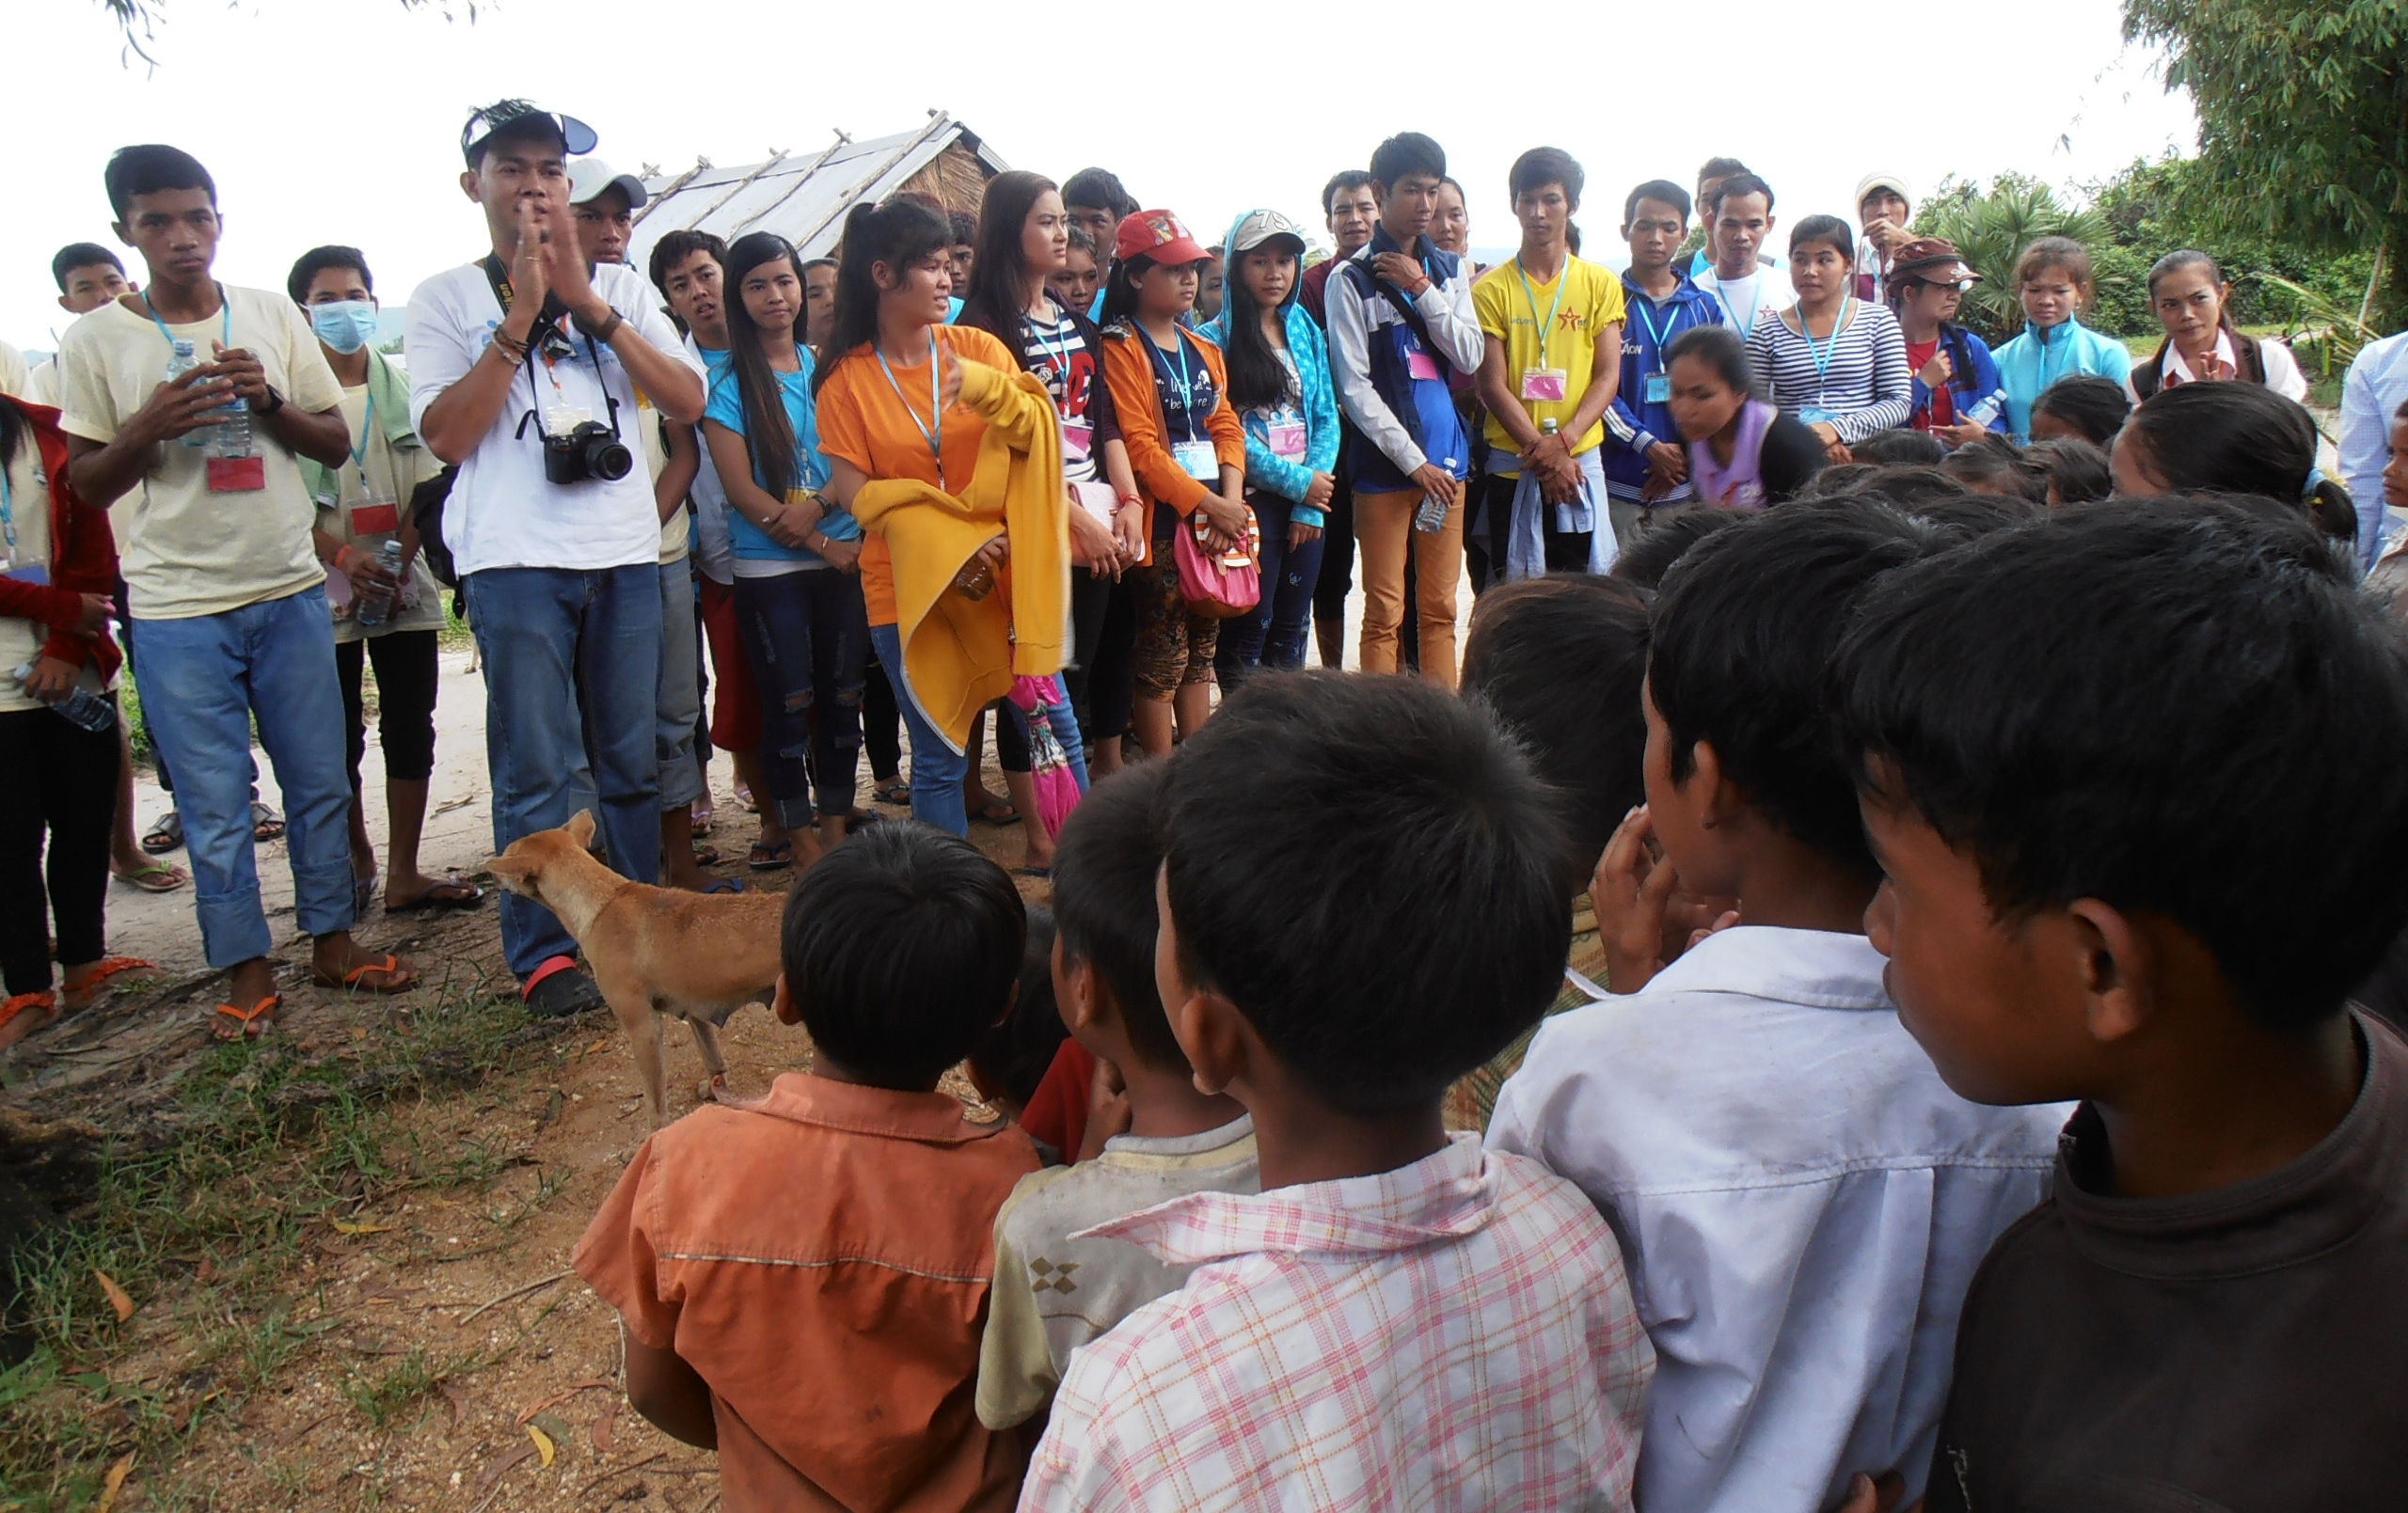 Prior to surveying the village families, our youth met with the village children